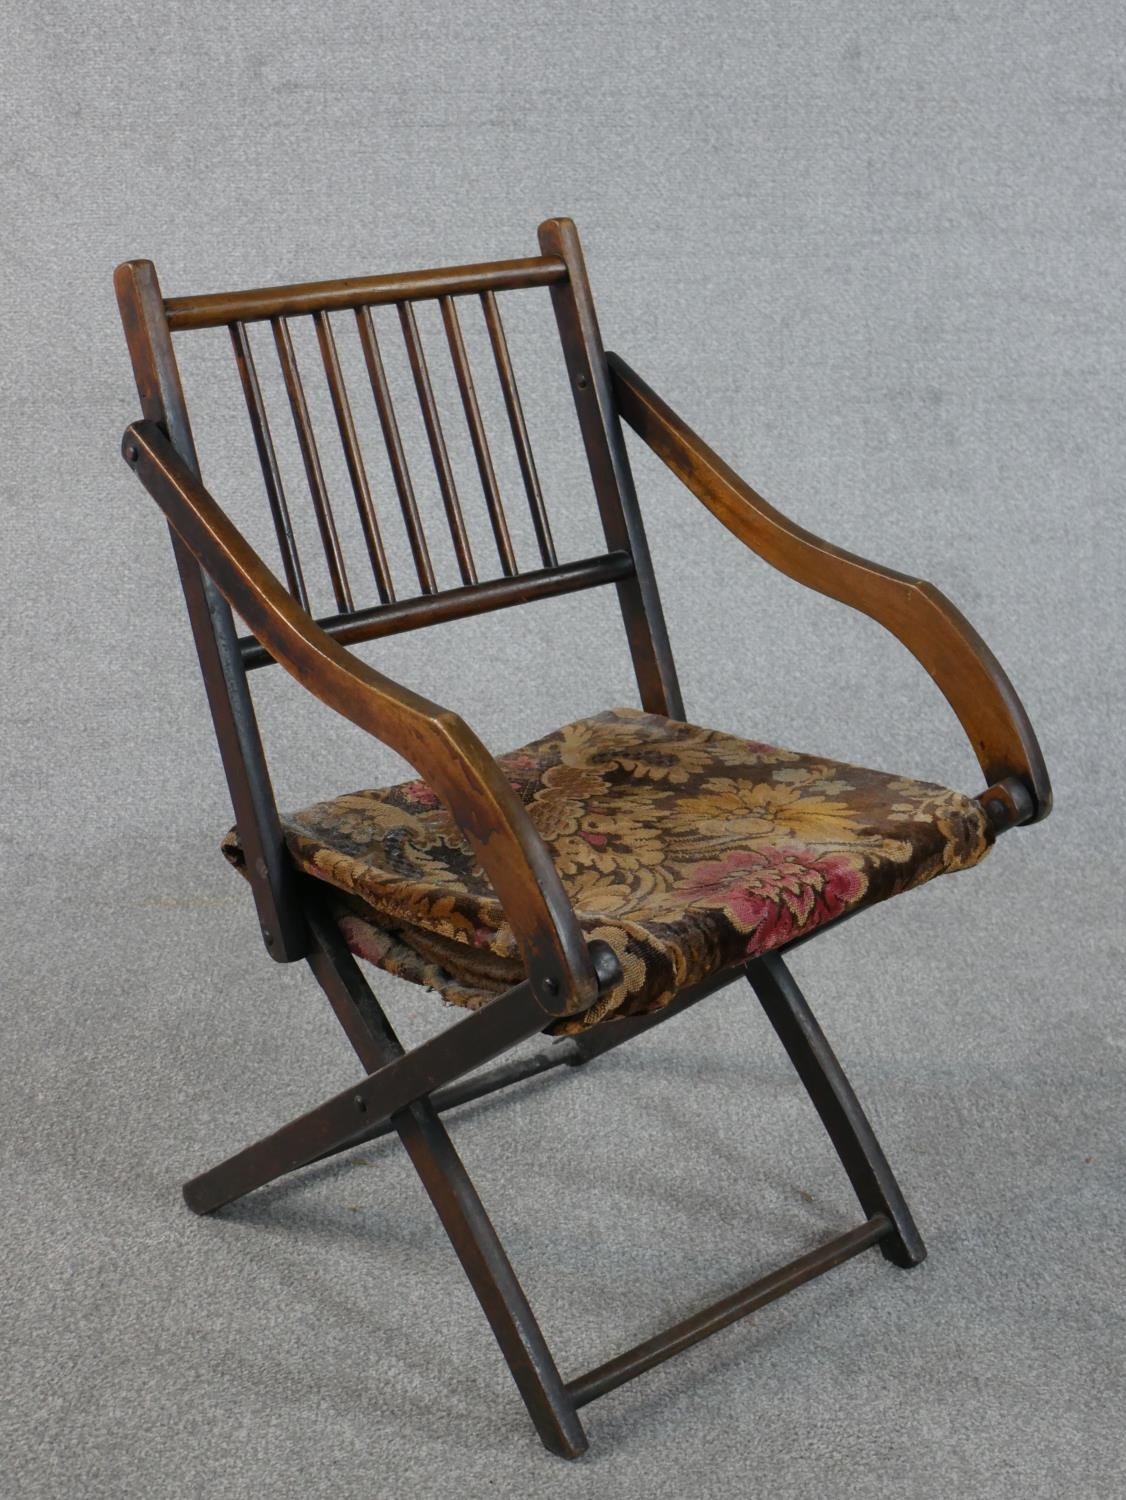 An early 20th century fruitwood folding armchair, with a spindle back, the seat upholstered in a - Image 2 of 6